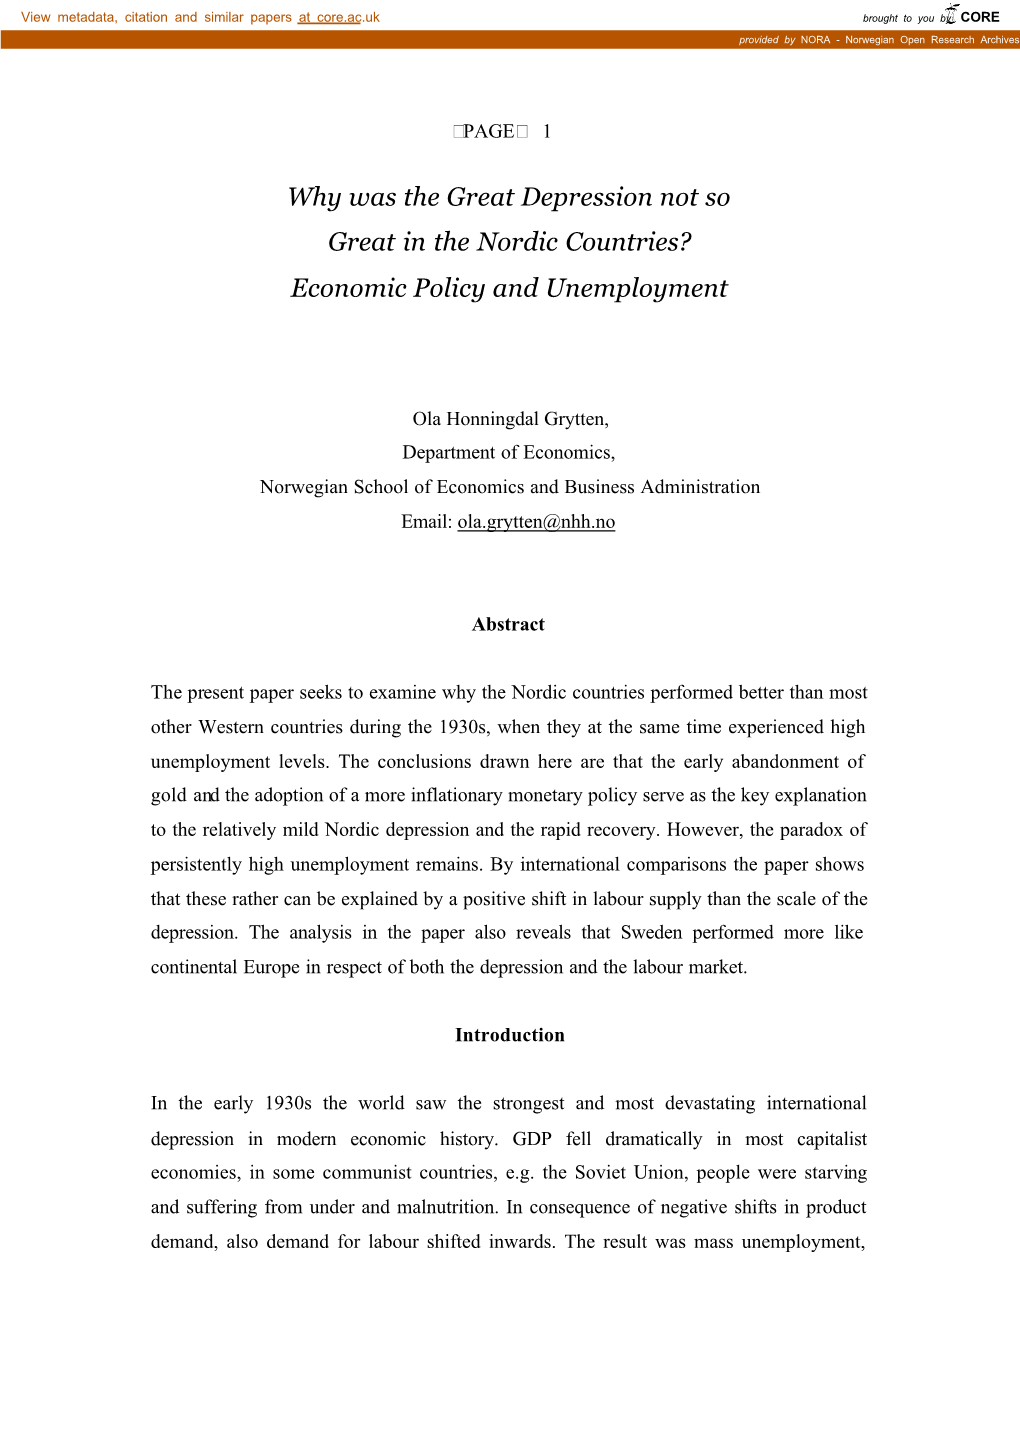 Why Was the Great Depression Not So Great in the Nordic Countries? Economic Policy and Unemployment